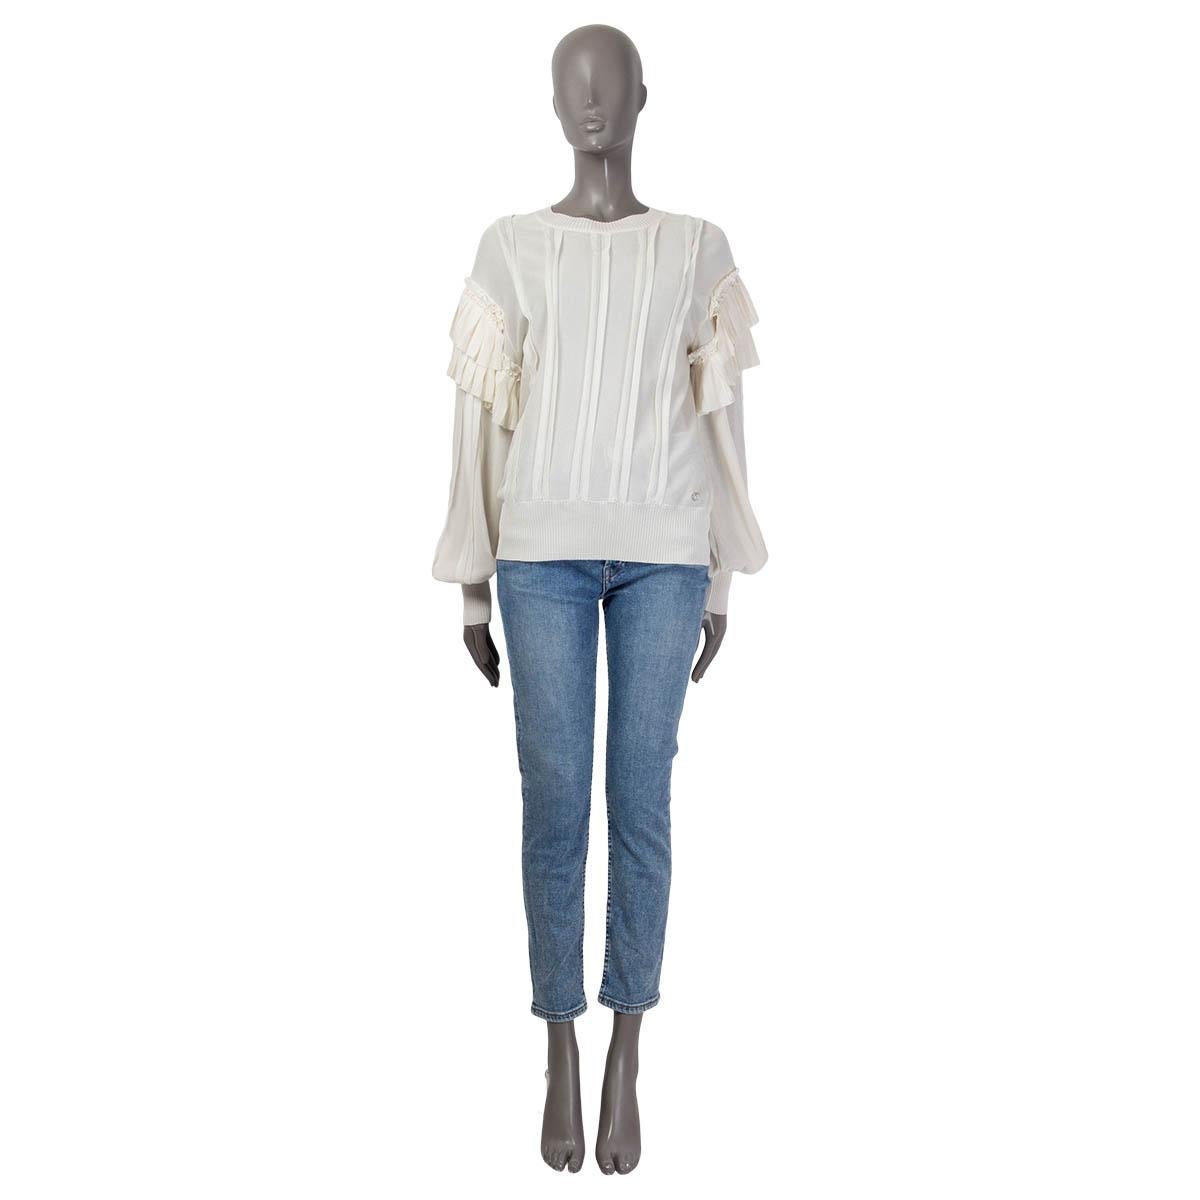 100% authentic Chanel long sleeve sweater in ivory silk (assumed cause tag is missing). 2018 pre spring/summer collection. Features ruched shoulders and a 'CC' emblem on the front. Has a ribbed hemline, collar and ribbed cuffs. Unlined. Has been